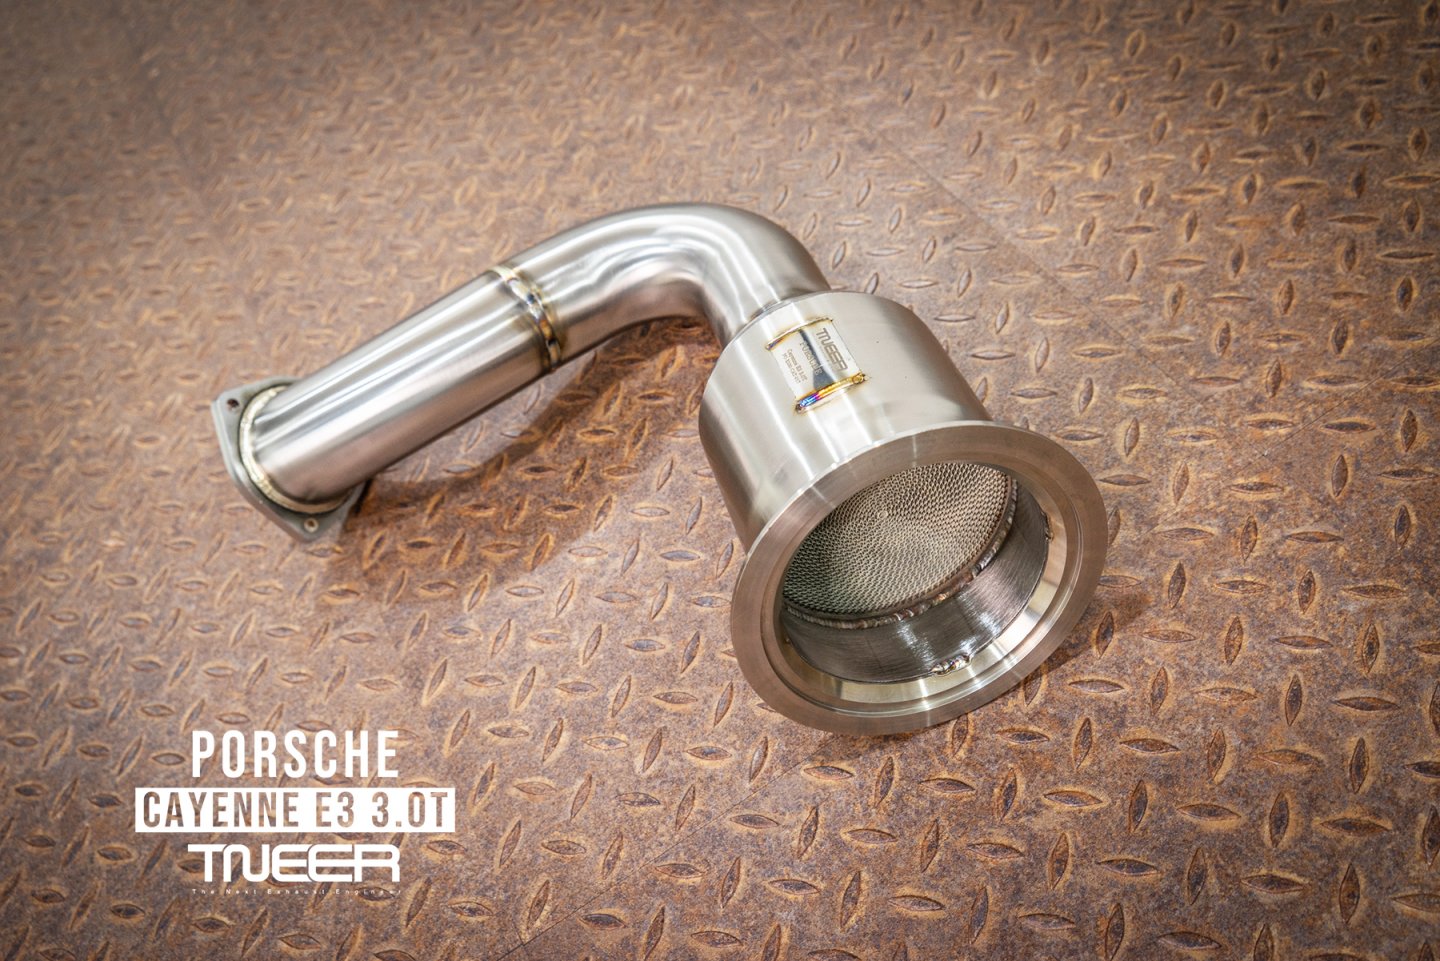 Porsche Cayenne/Coupe (E3) 3.0T TNEER Performance Exhaust System